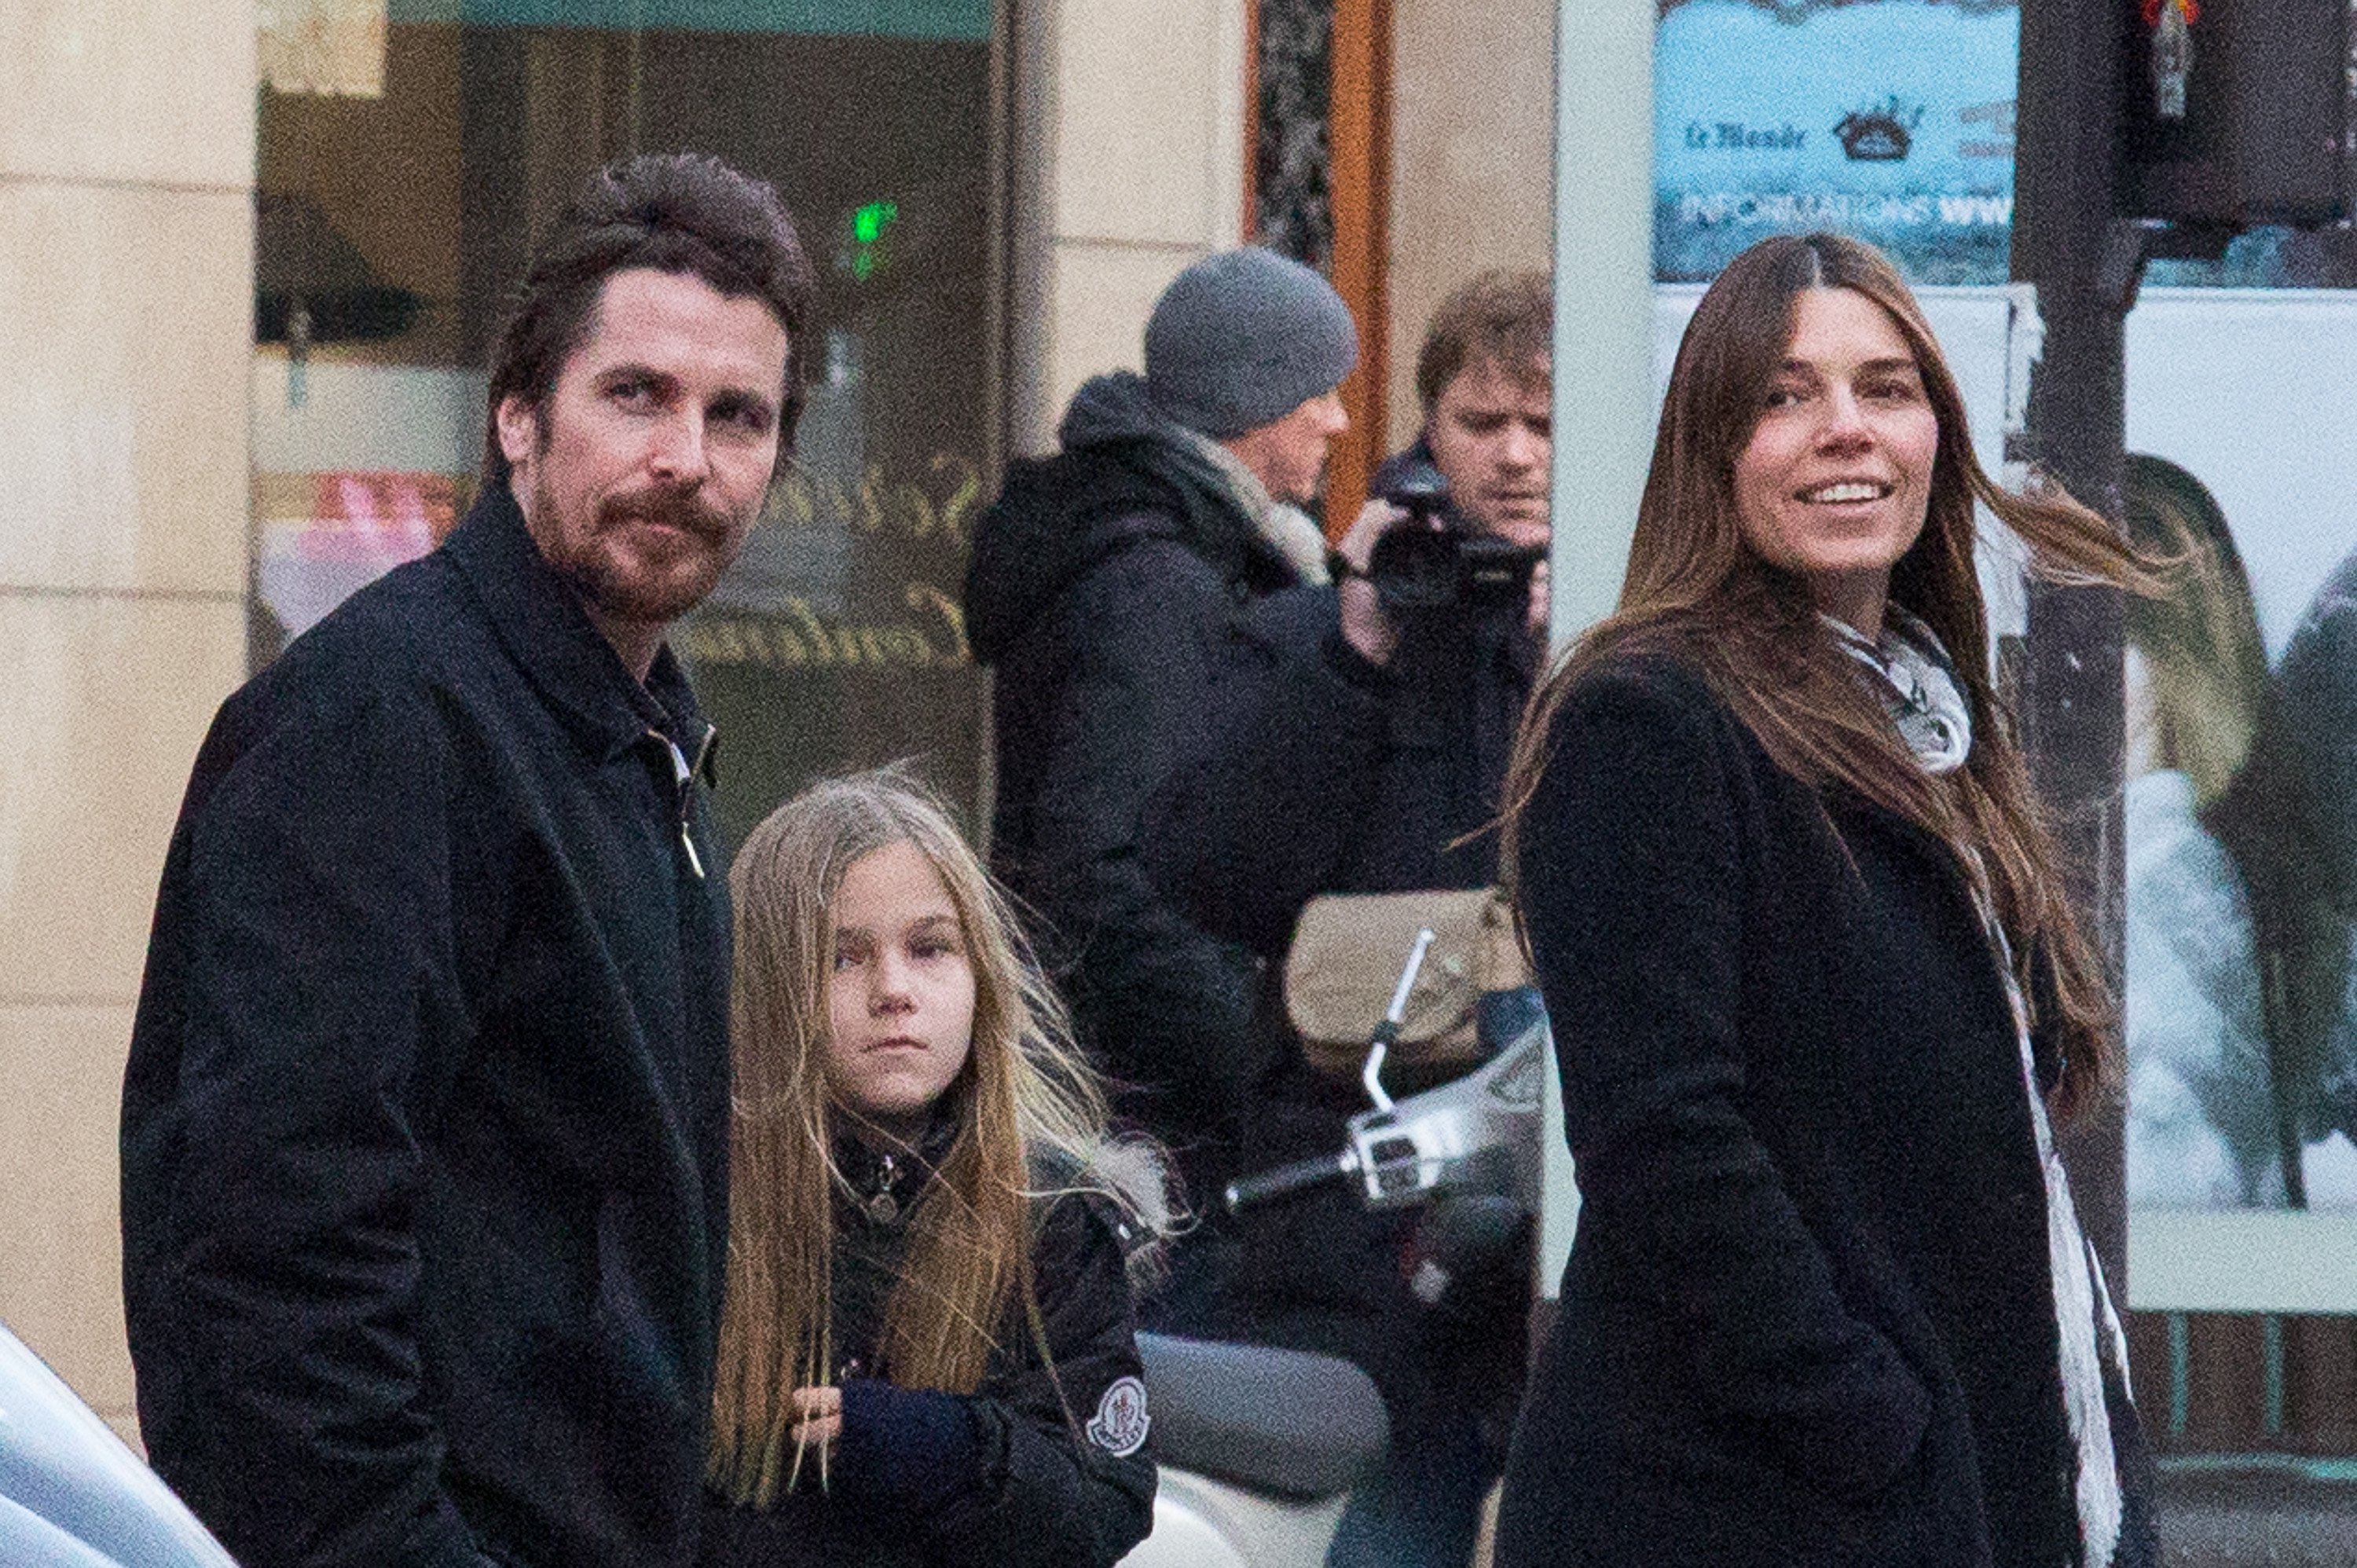 Christian Bale, his daughter Emmeline Bale, and wife Sibi Blažić at the Saint-Germain-des-Pres quarter in Paris, France, on January 27, 2014 | Source: Getty Images